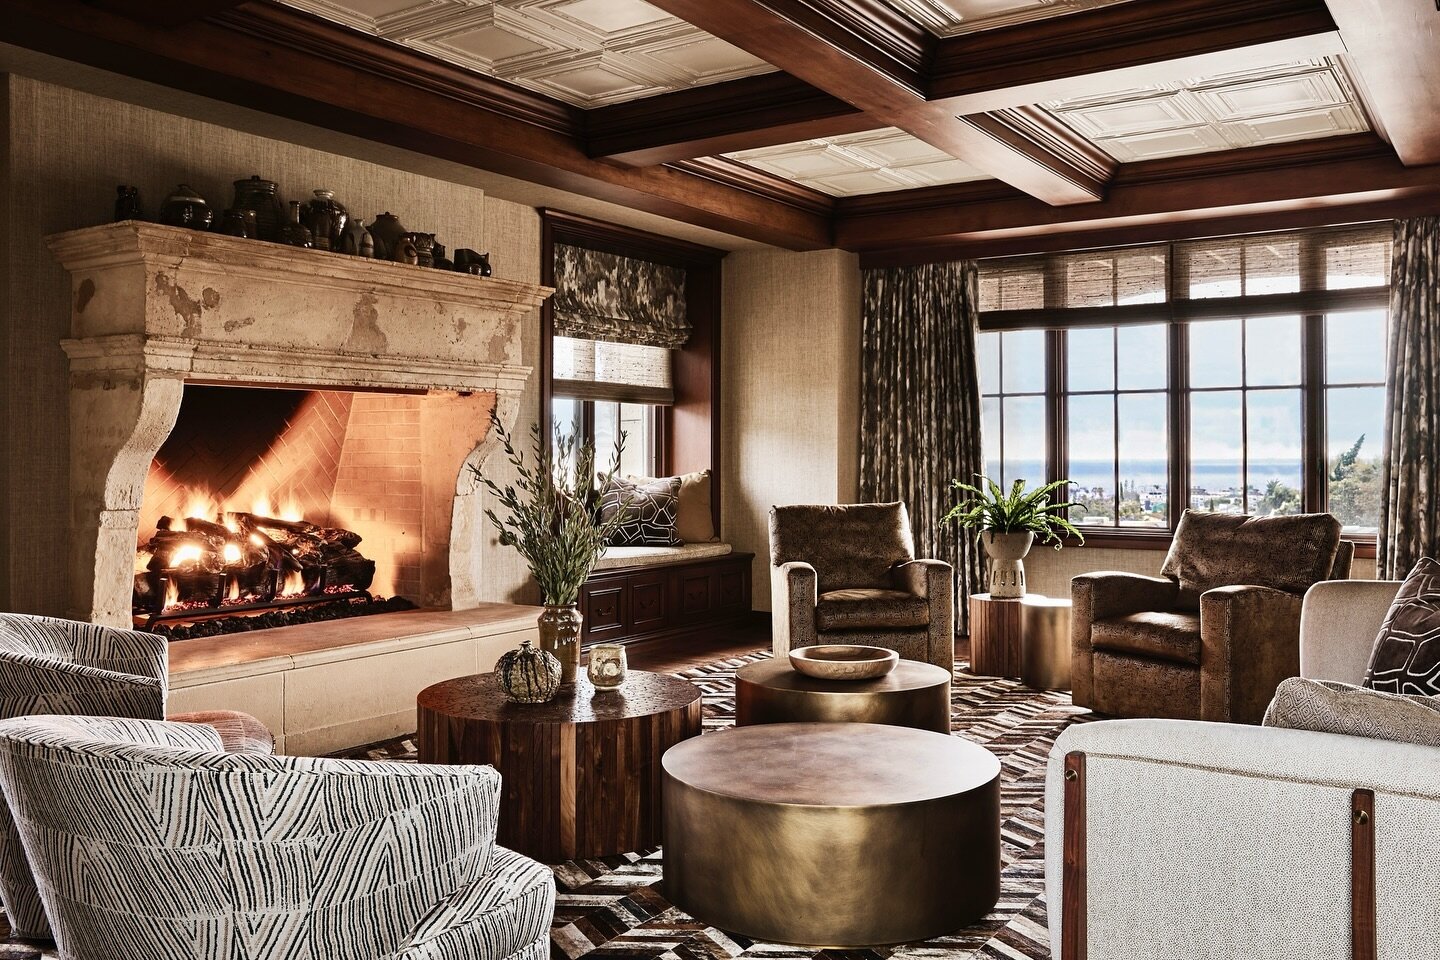 Home is where the hearth is! 
The living room of our #manhattanbeach project as featured by @modernluxuryinteriors @interiorscalifornia 
Sofa by @thomashayesstudio , chairs by @arudin1912 , tables by @coupdetatsf and rug by @kylebunting 

Photo @samf